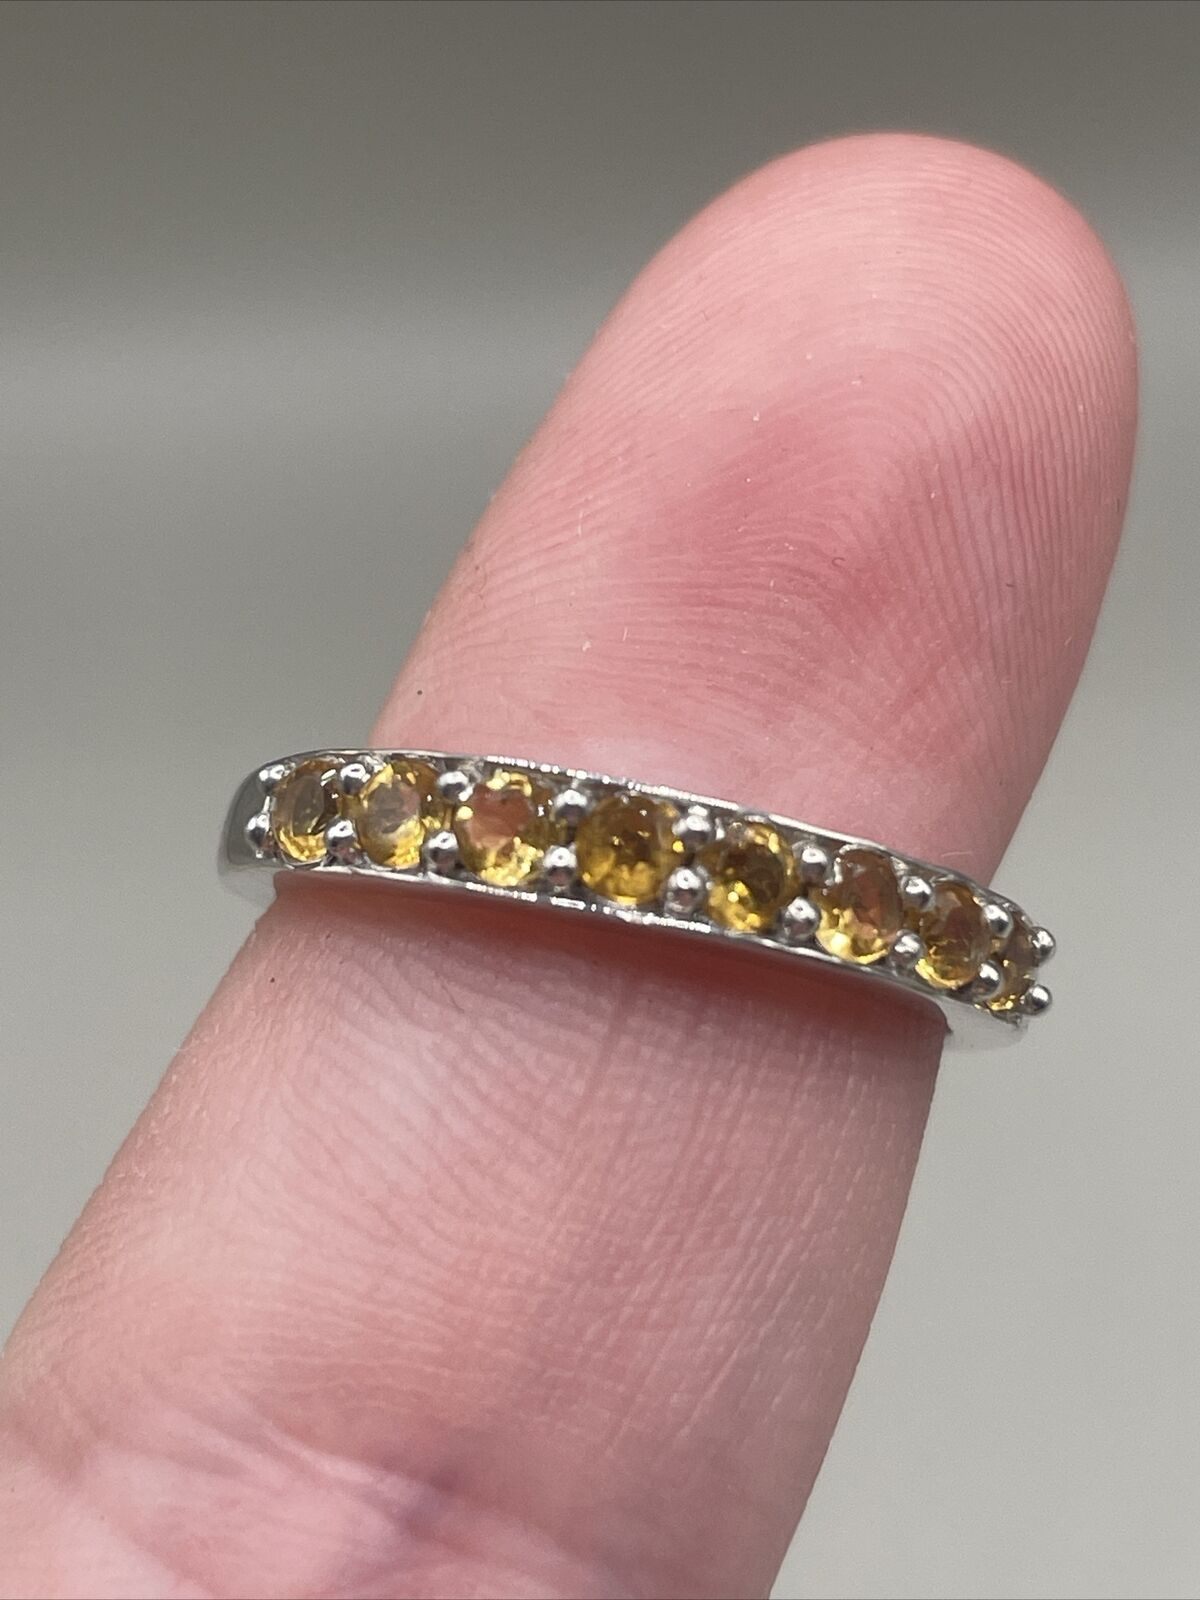 Vintage Sterling Silver & Citrine Band Ring Size 7.5 Gemstone Jewelry 925